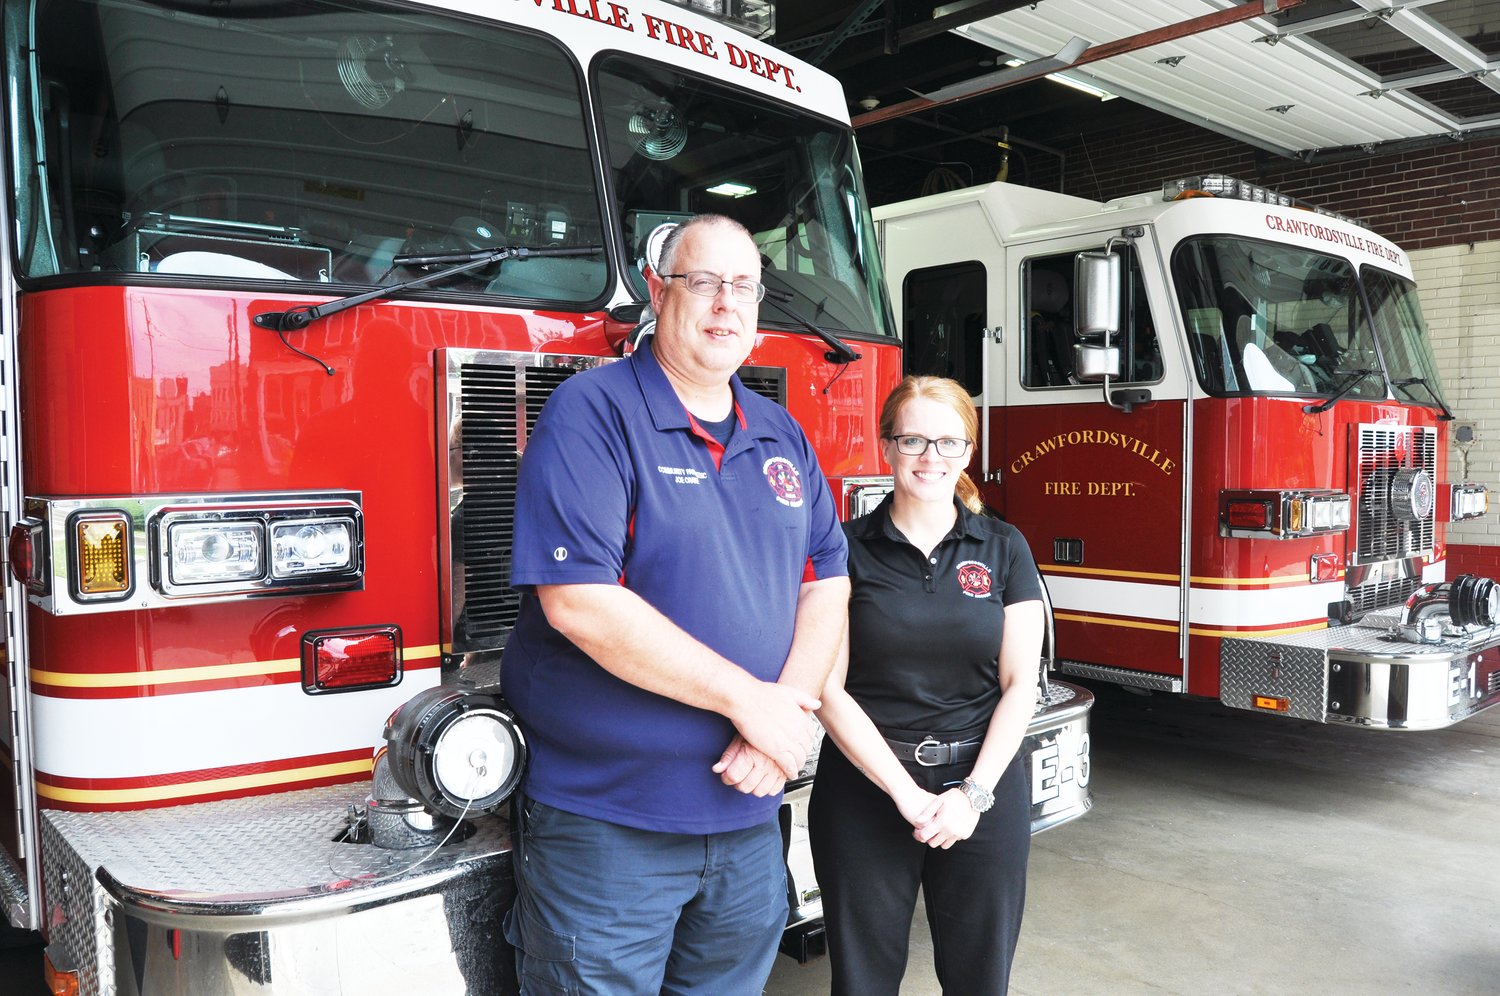 Joe Crane, firefighter/paramedic, and Rachel Kenner, early intervention specialist, are members of the Community Paramedicine Program's Quick Response Team. The team responds to calls involving overdoses, substance use or mental health crises and connects patients to recovery services.